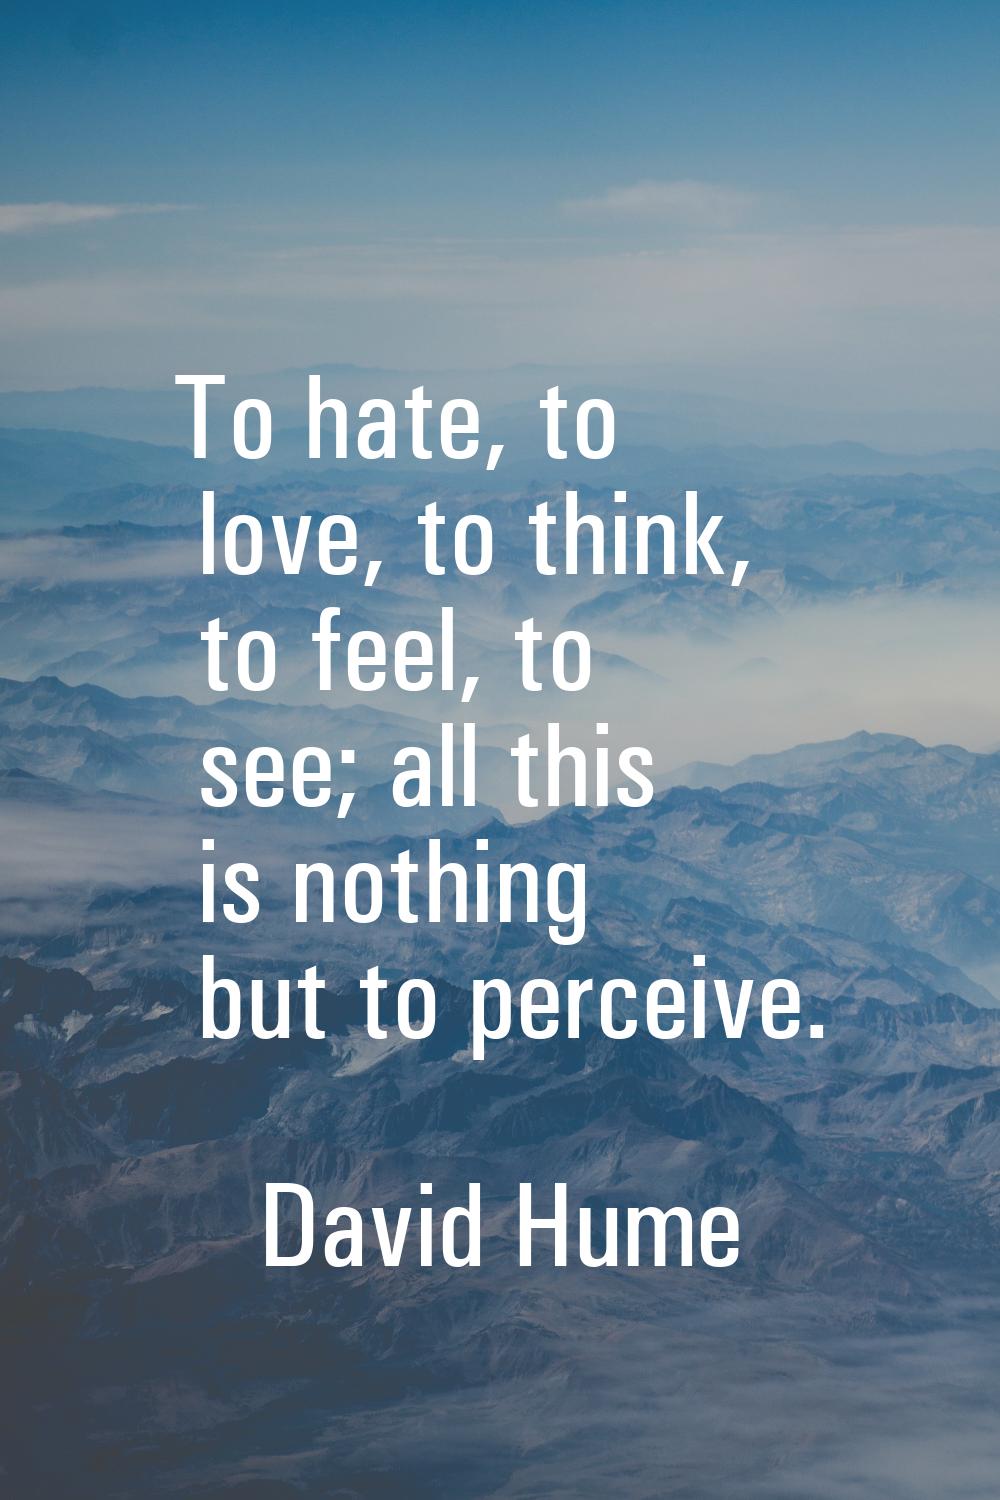 To hate, to love, to think, to feel, to see; all this is nothing but to perceive.